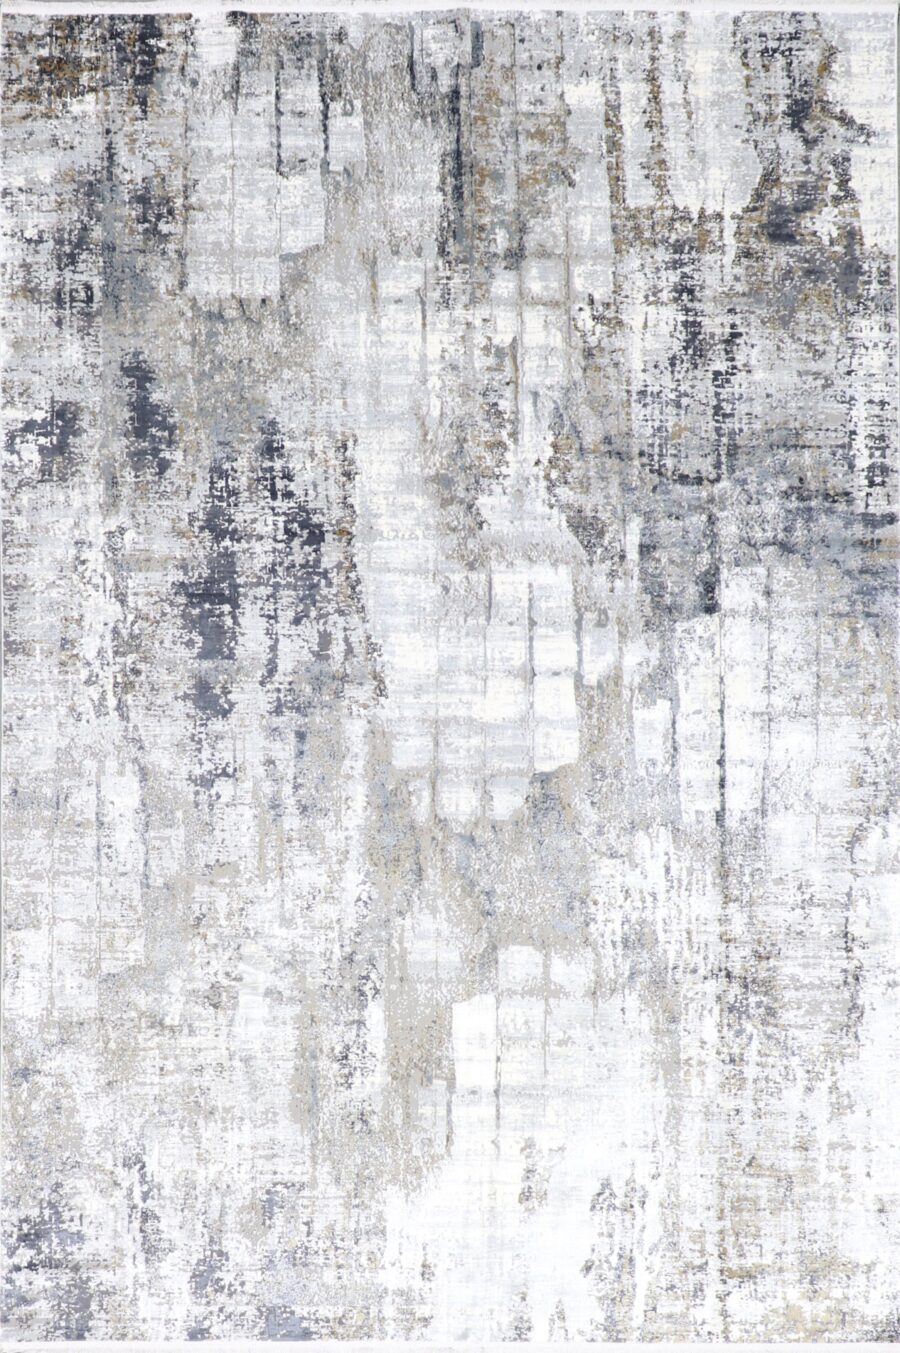 7’9”x9’9” Transitional Gray Wool & Silk Hand-Finished Rug - Direct Rug Import | Rugs in Chicago, Indiana,South Bend,Granger